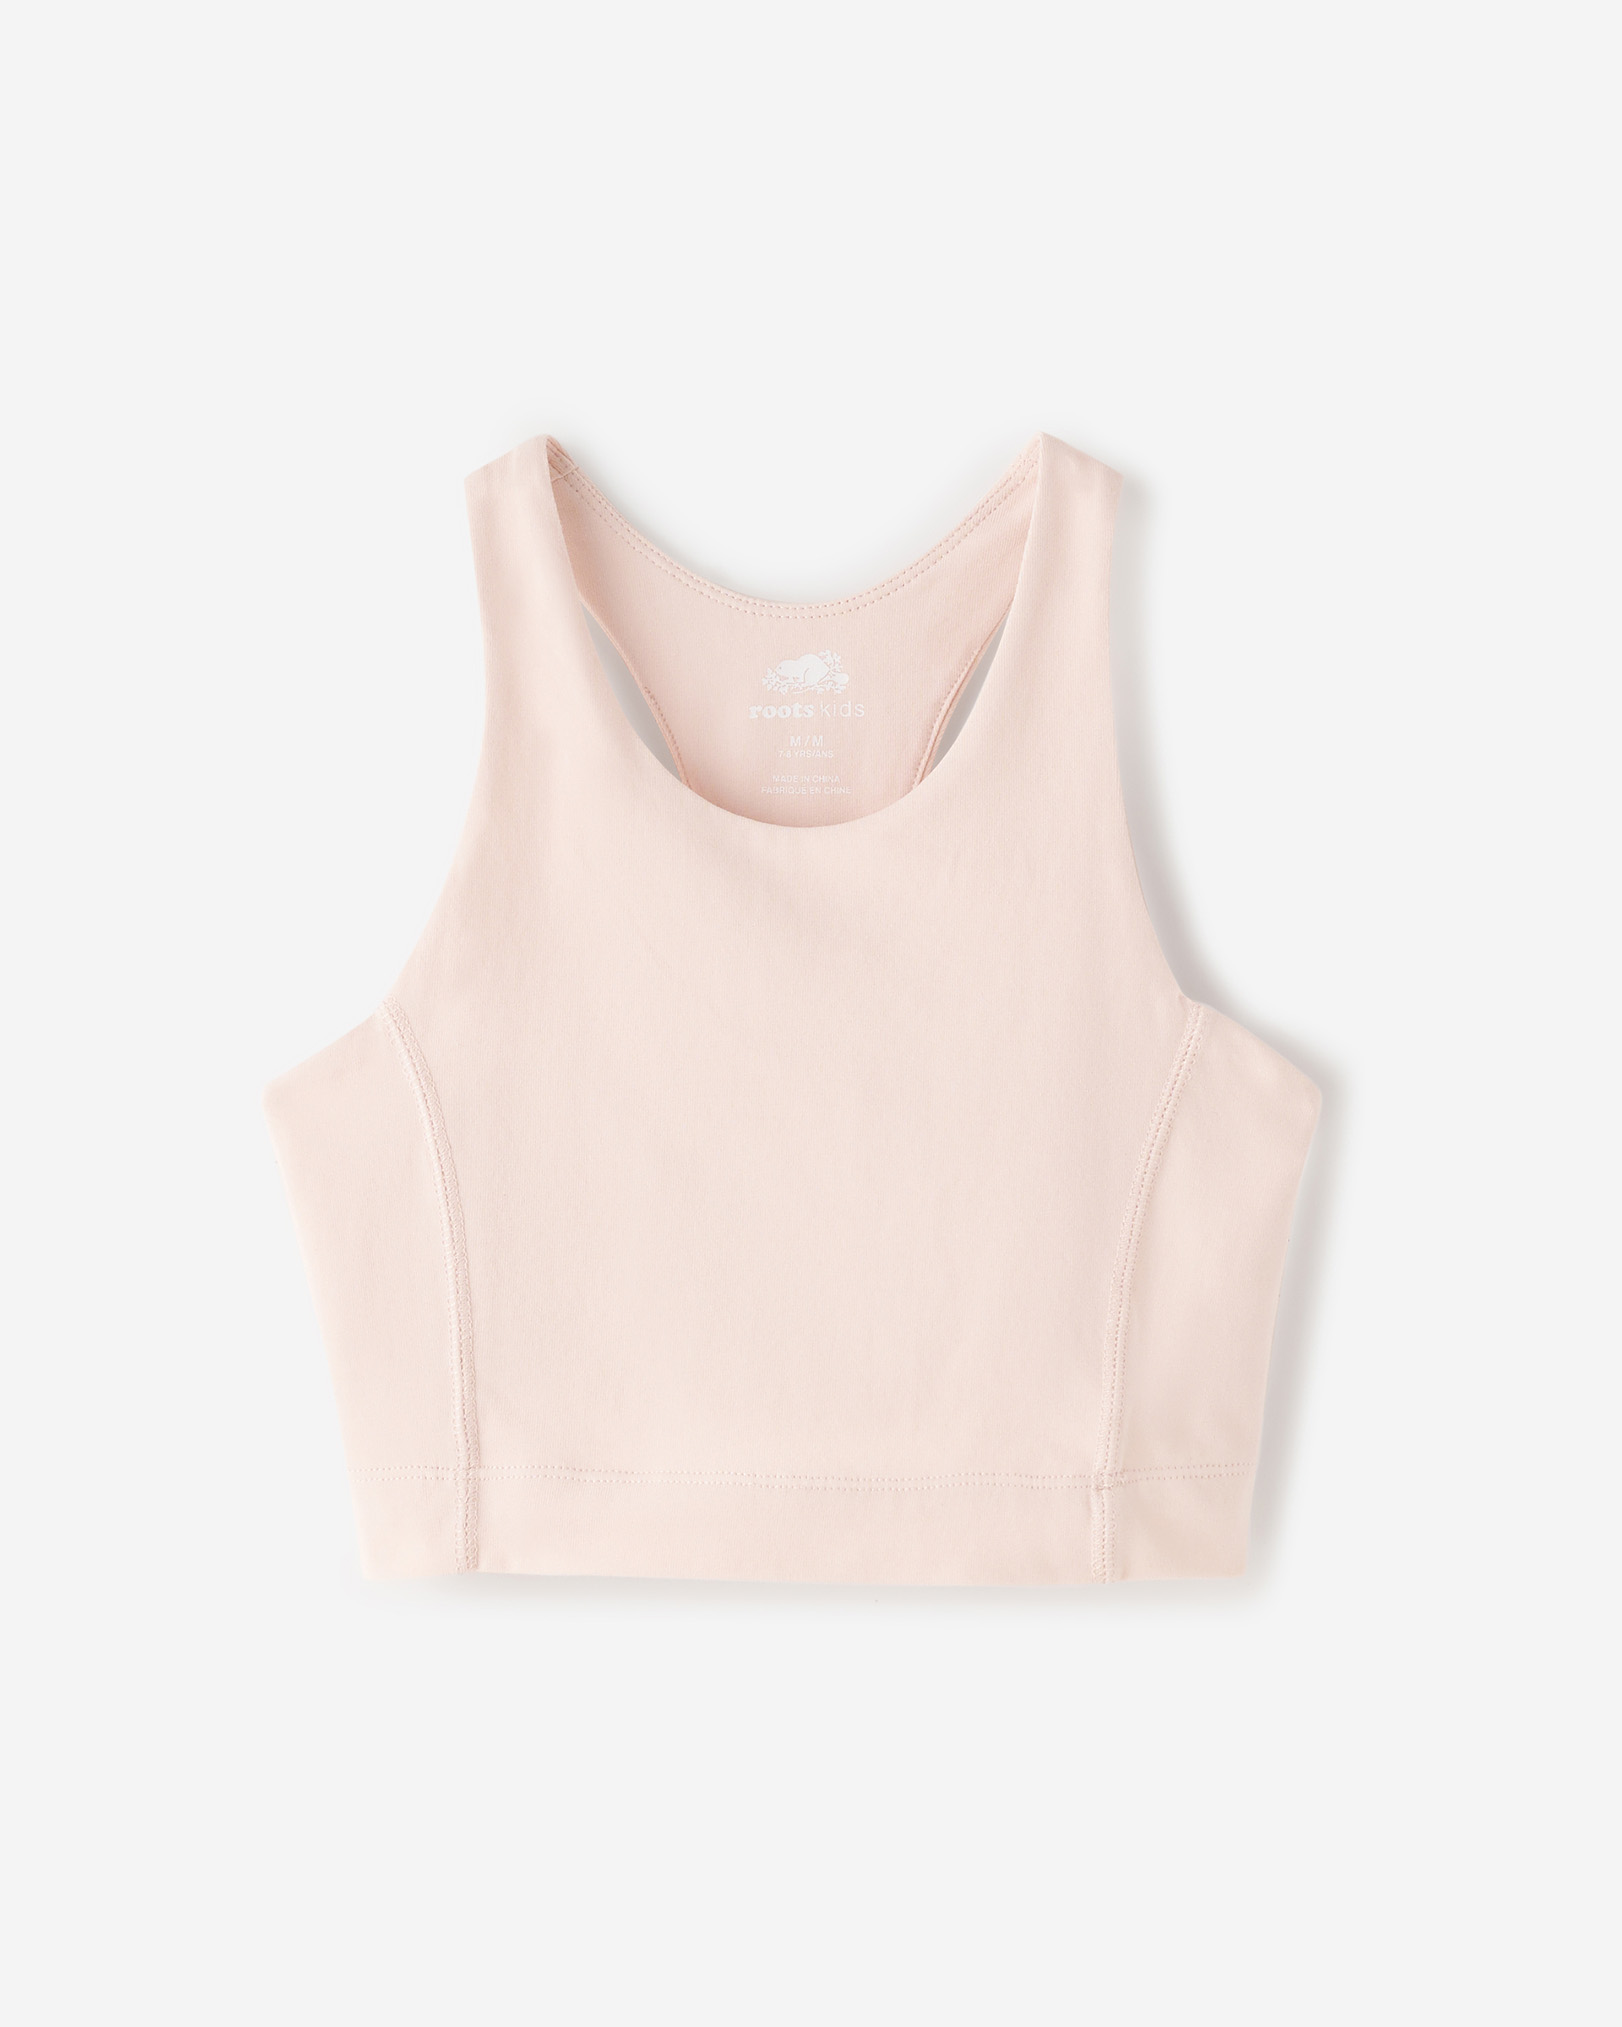 Roots Girl's Stretch Racerback Tank Top in Pearl Pink